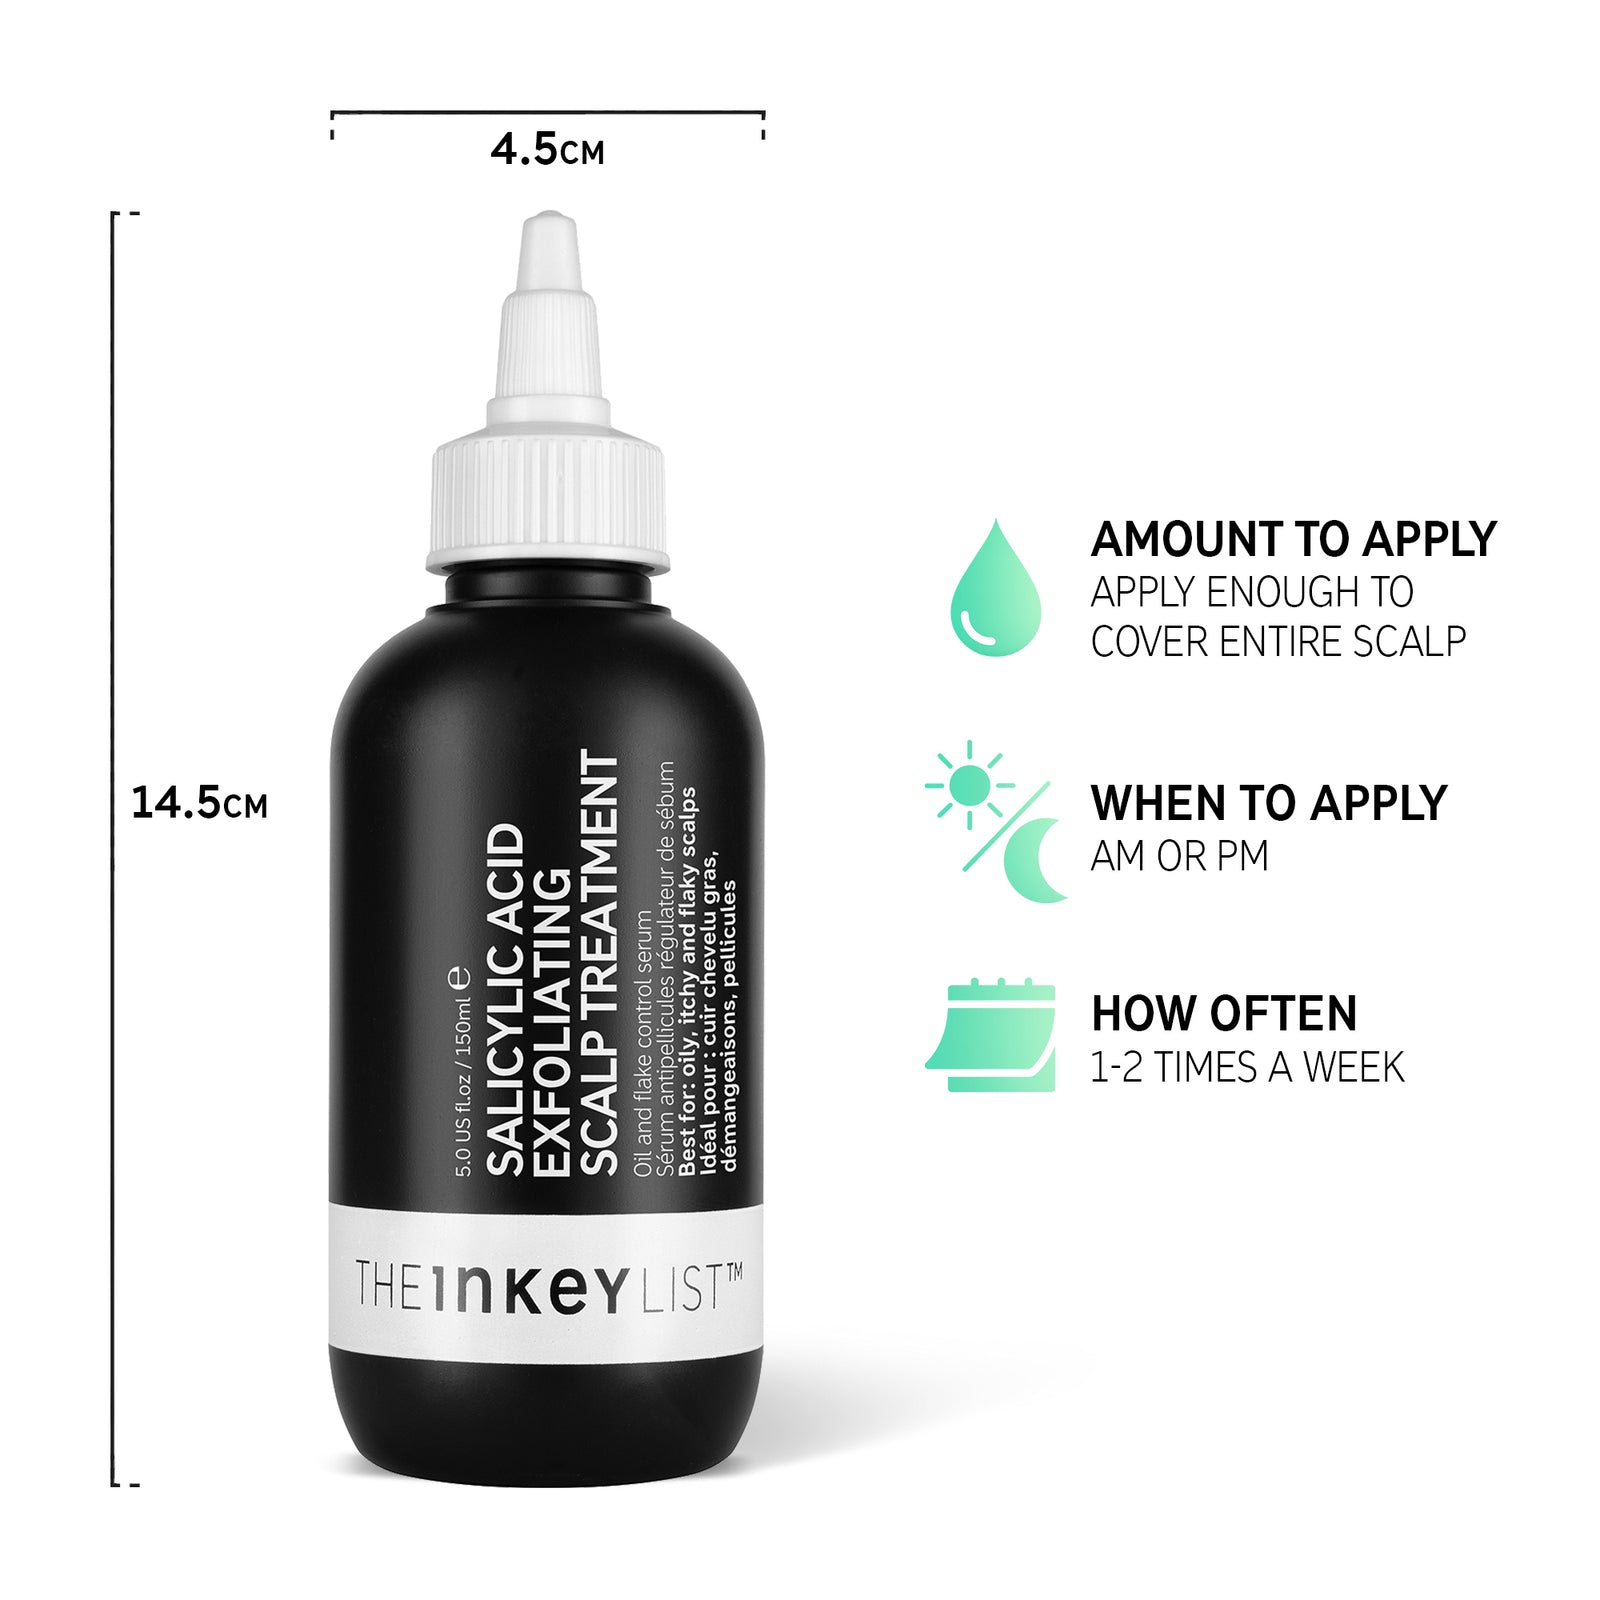 Salicylic Acid Exfoliating Scalp Treatment bottle infographic including dimensions of bottle and text explaining amount to apply (enough to cover scalp), when to apply (AM or PM) and how often to apply (1-2 times a week)